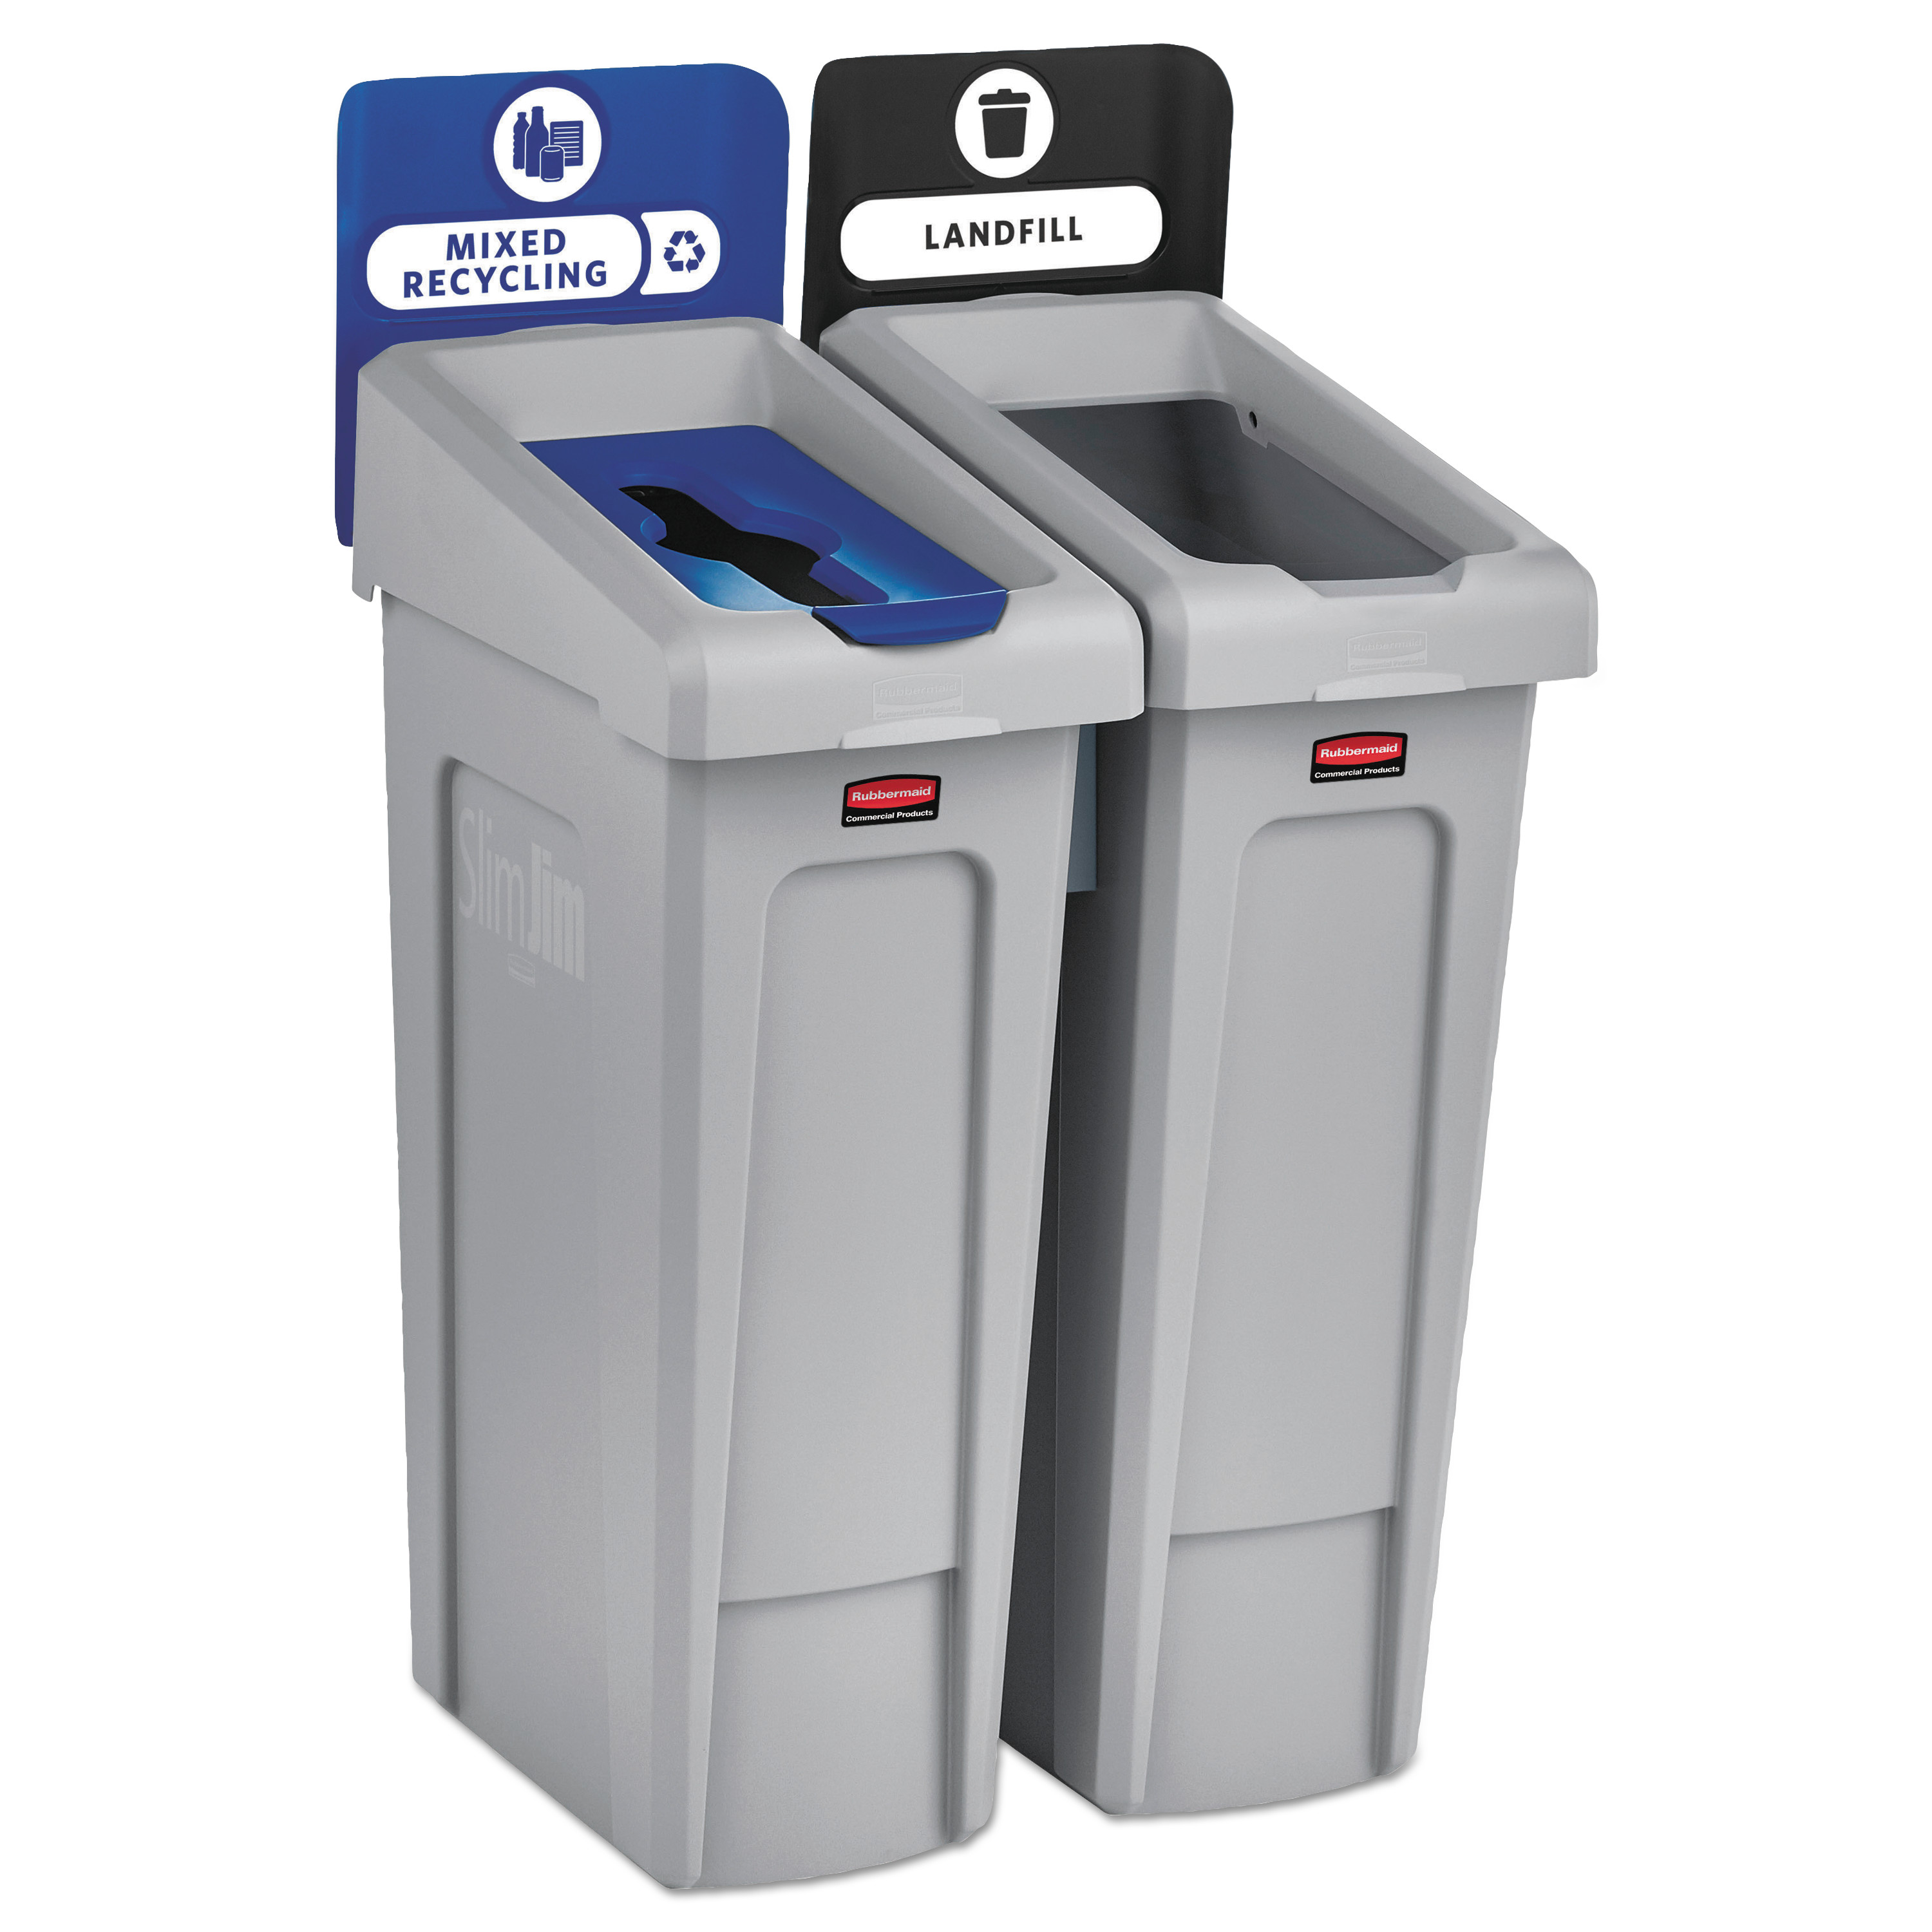  Rubbermaid Commercial 2007914 Slim Jim Recycling Station Kit, 46 gal, 2-Stream Landfill/Mixed Recycling (RCP2007914) 